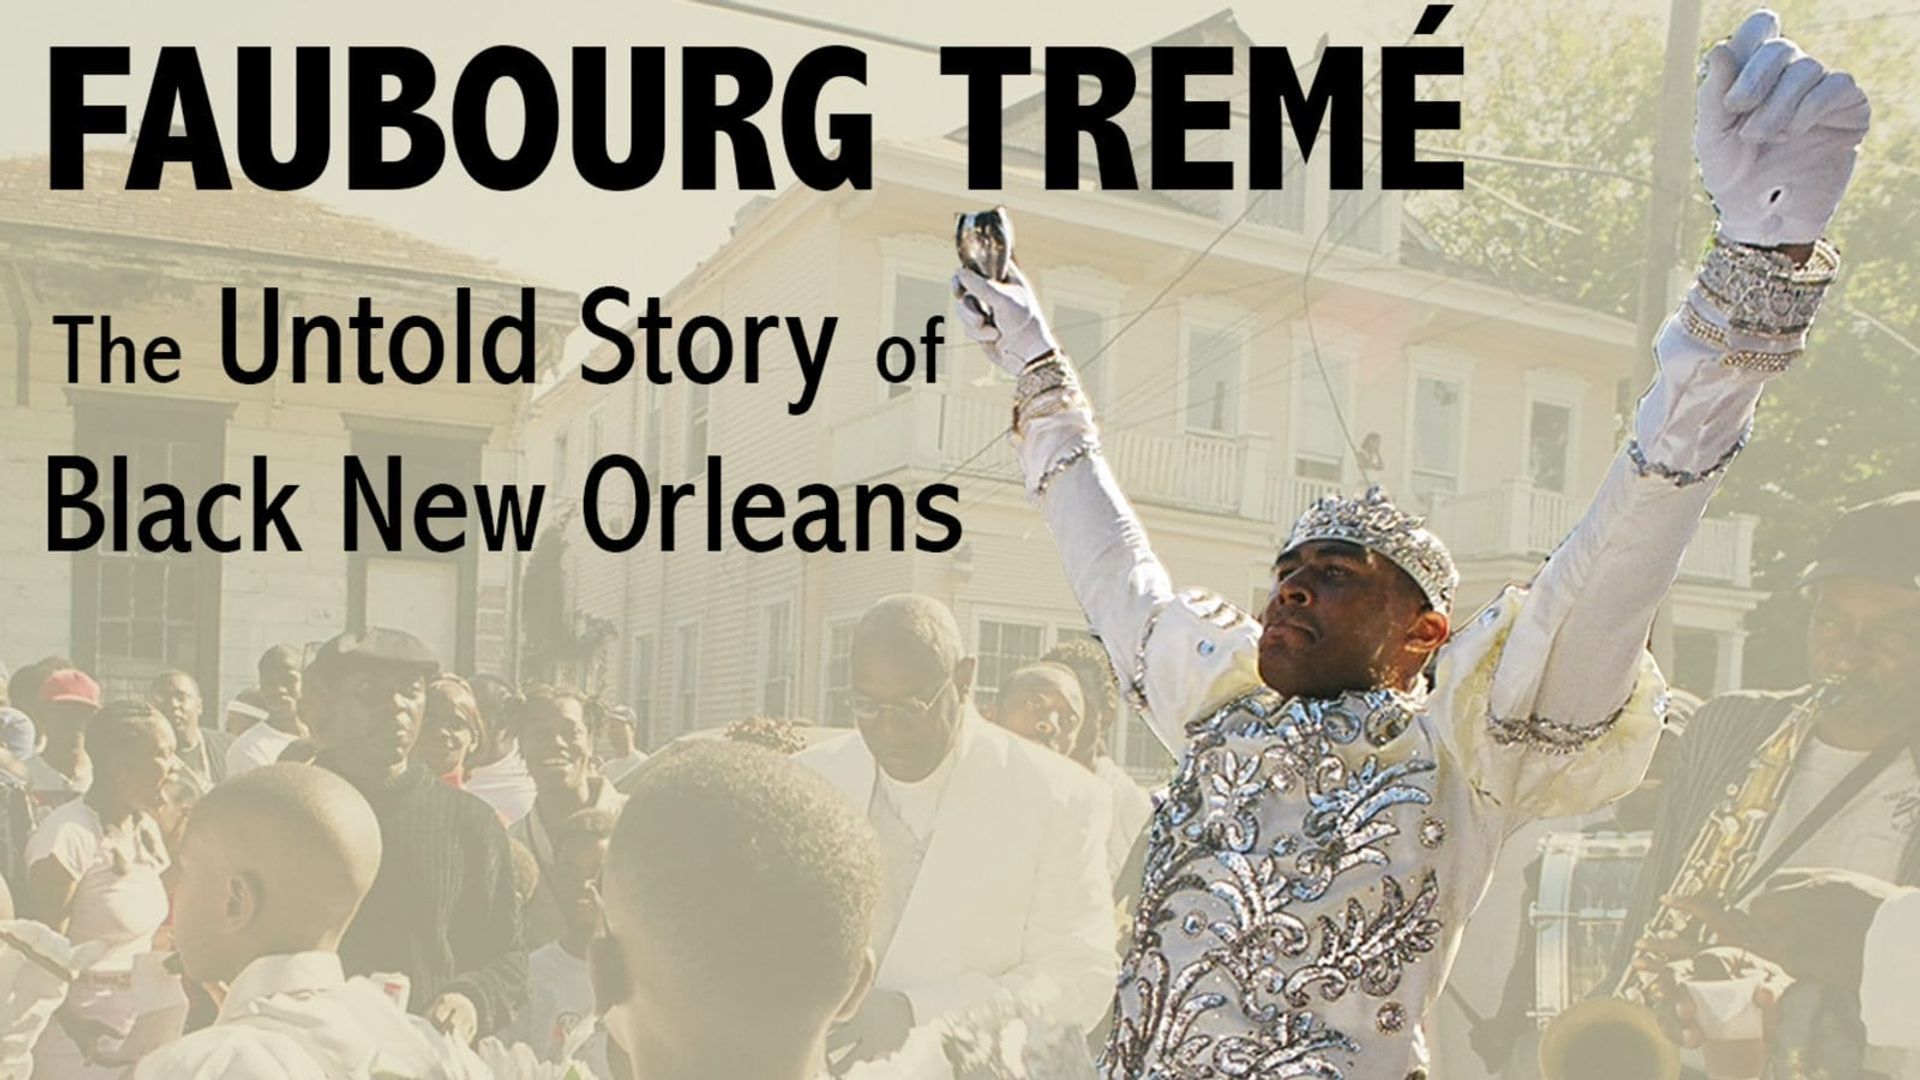 Faubourg Tremé: The Untold Story of Black New Orleans background